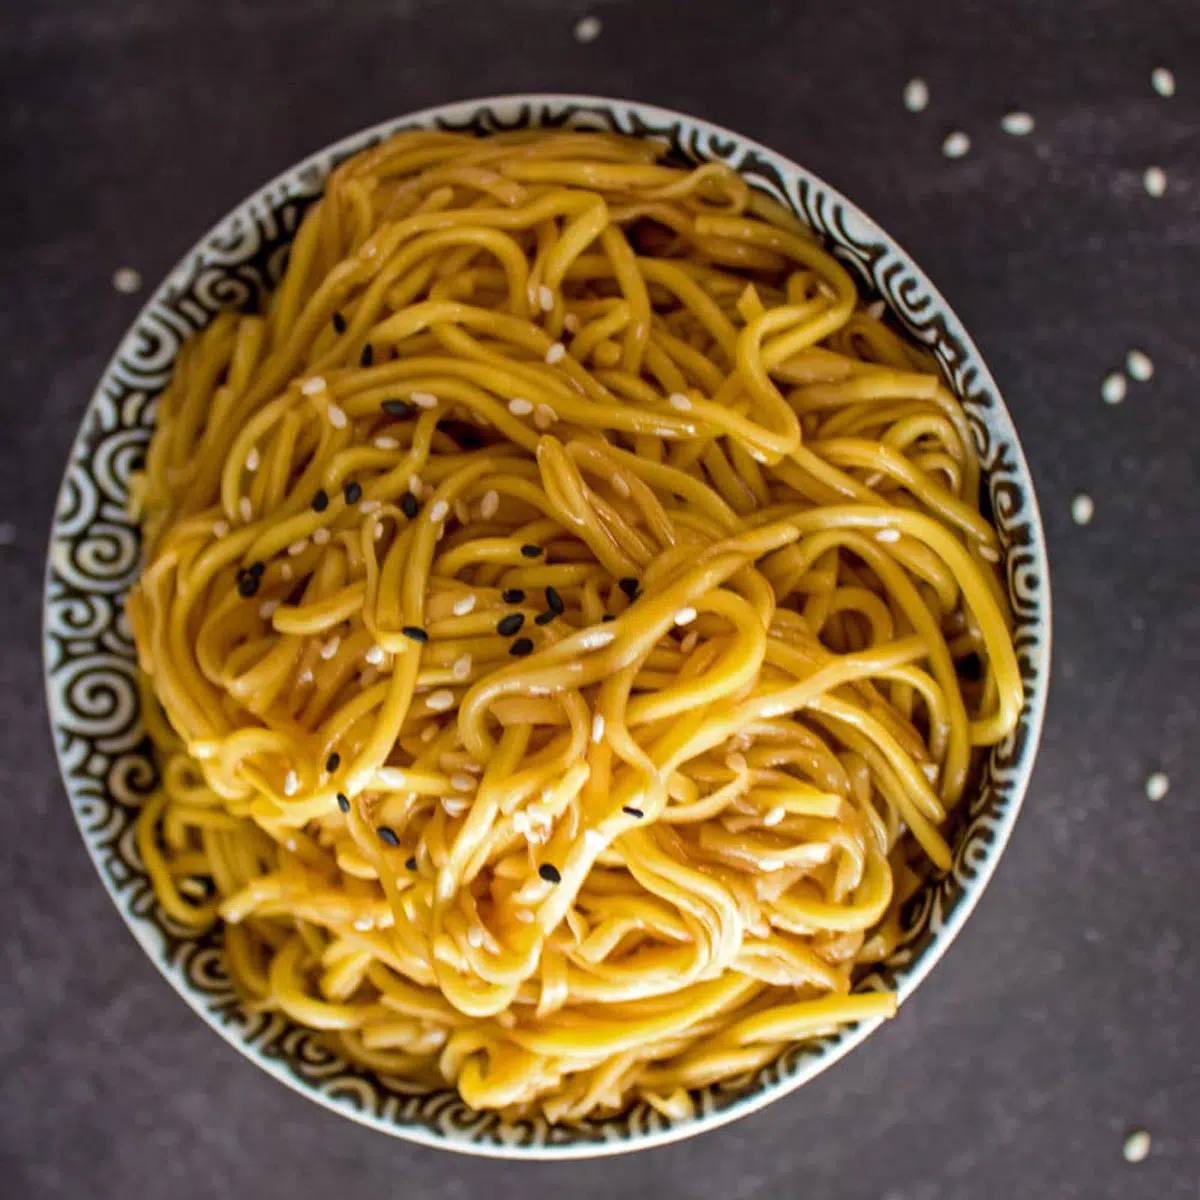 Top down photo showing bowl of hibachi noodles with sesame seeds.